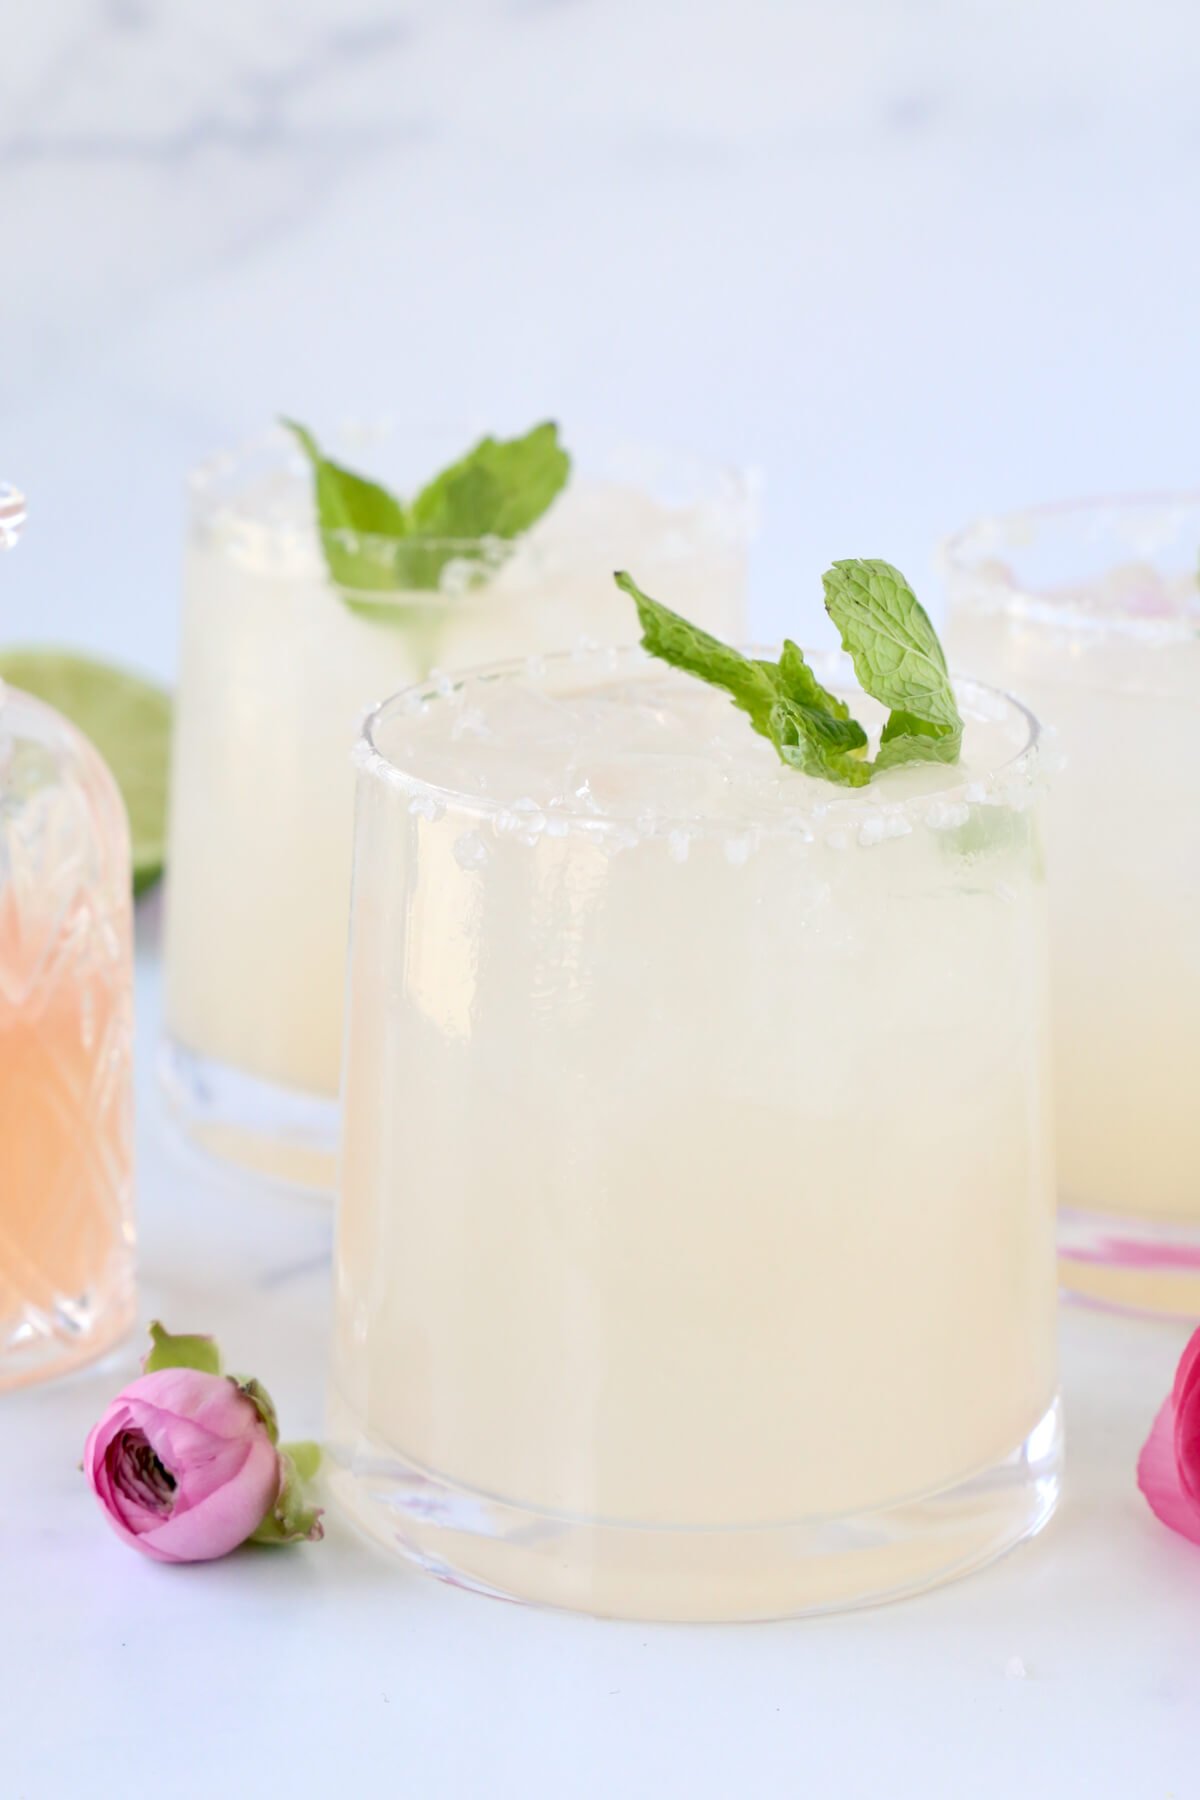 Three glasses with grapefruit, lime juice and tequila mixed together with a fresh mint leave on top next to pint flowers.